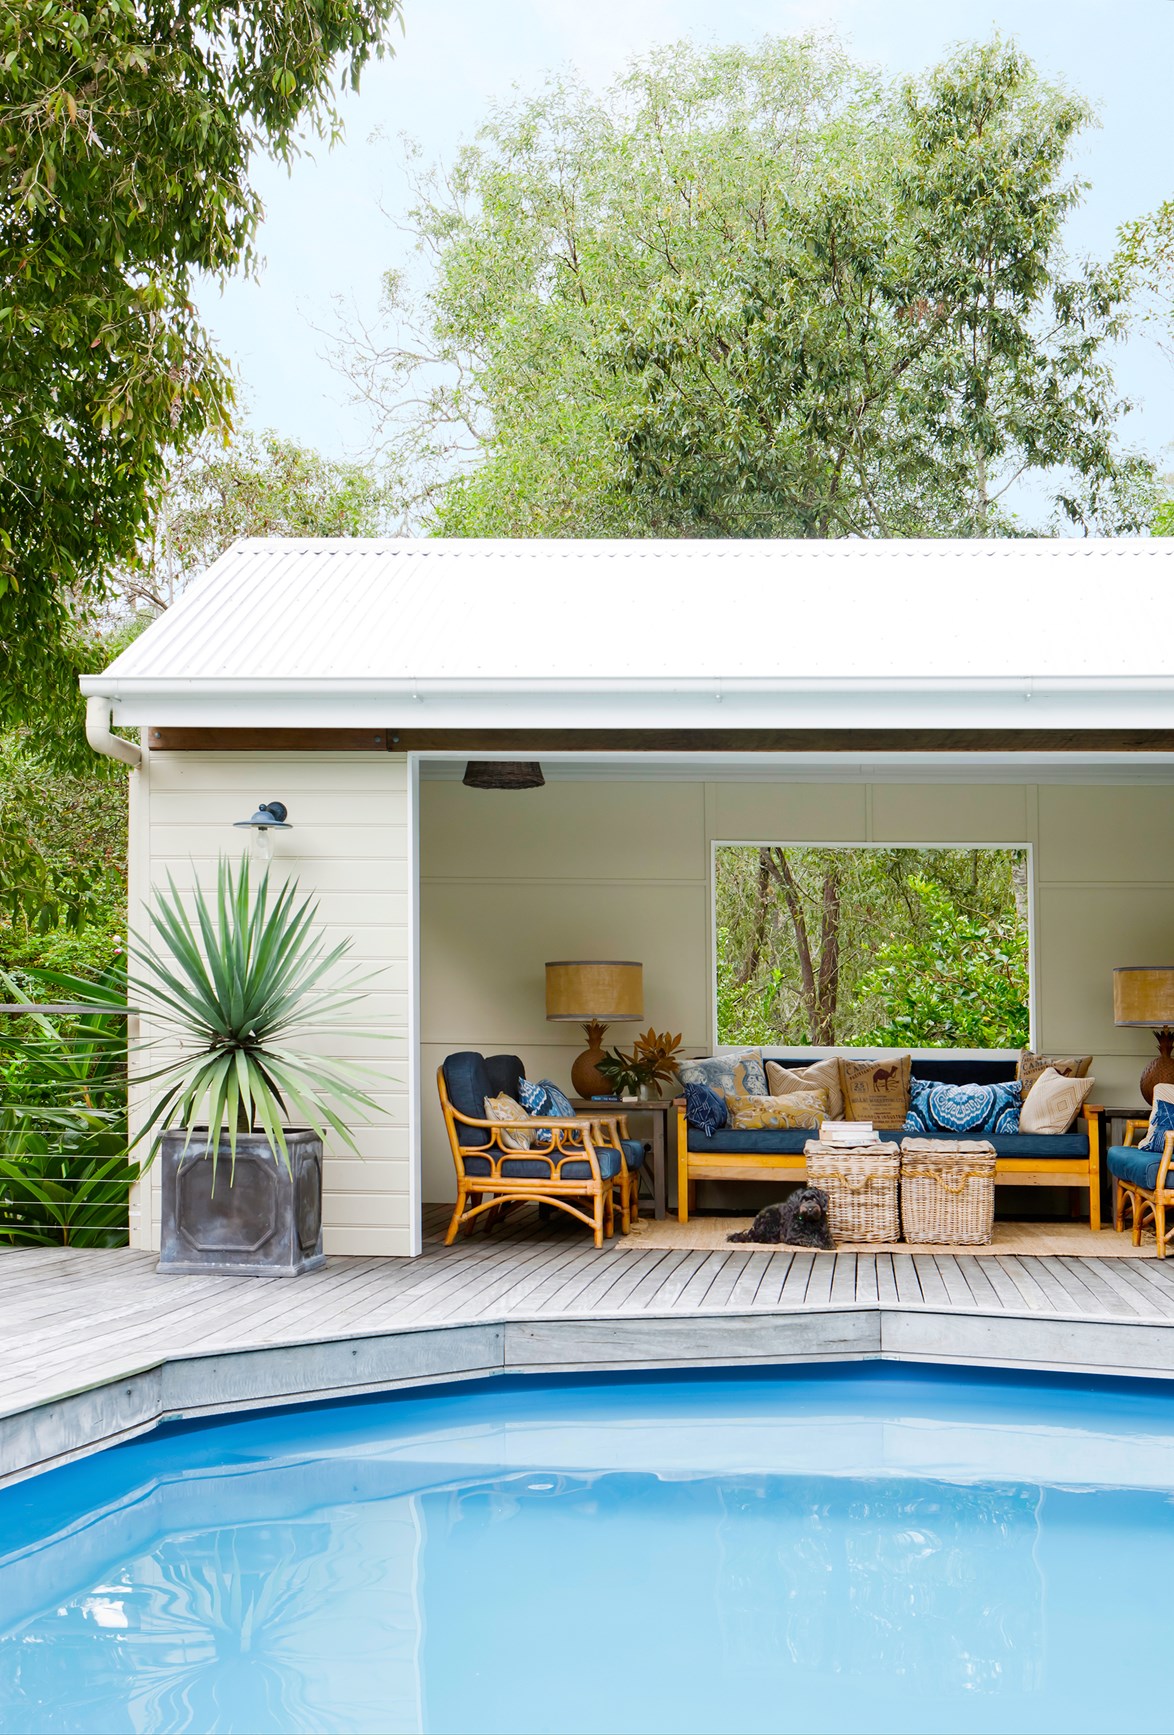 "Cabanas should be used as a fun room," says Dave. *Photo: Maree Homer / Styling: Kate Nixon*